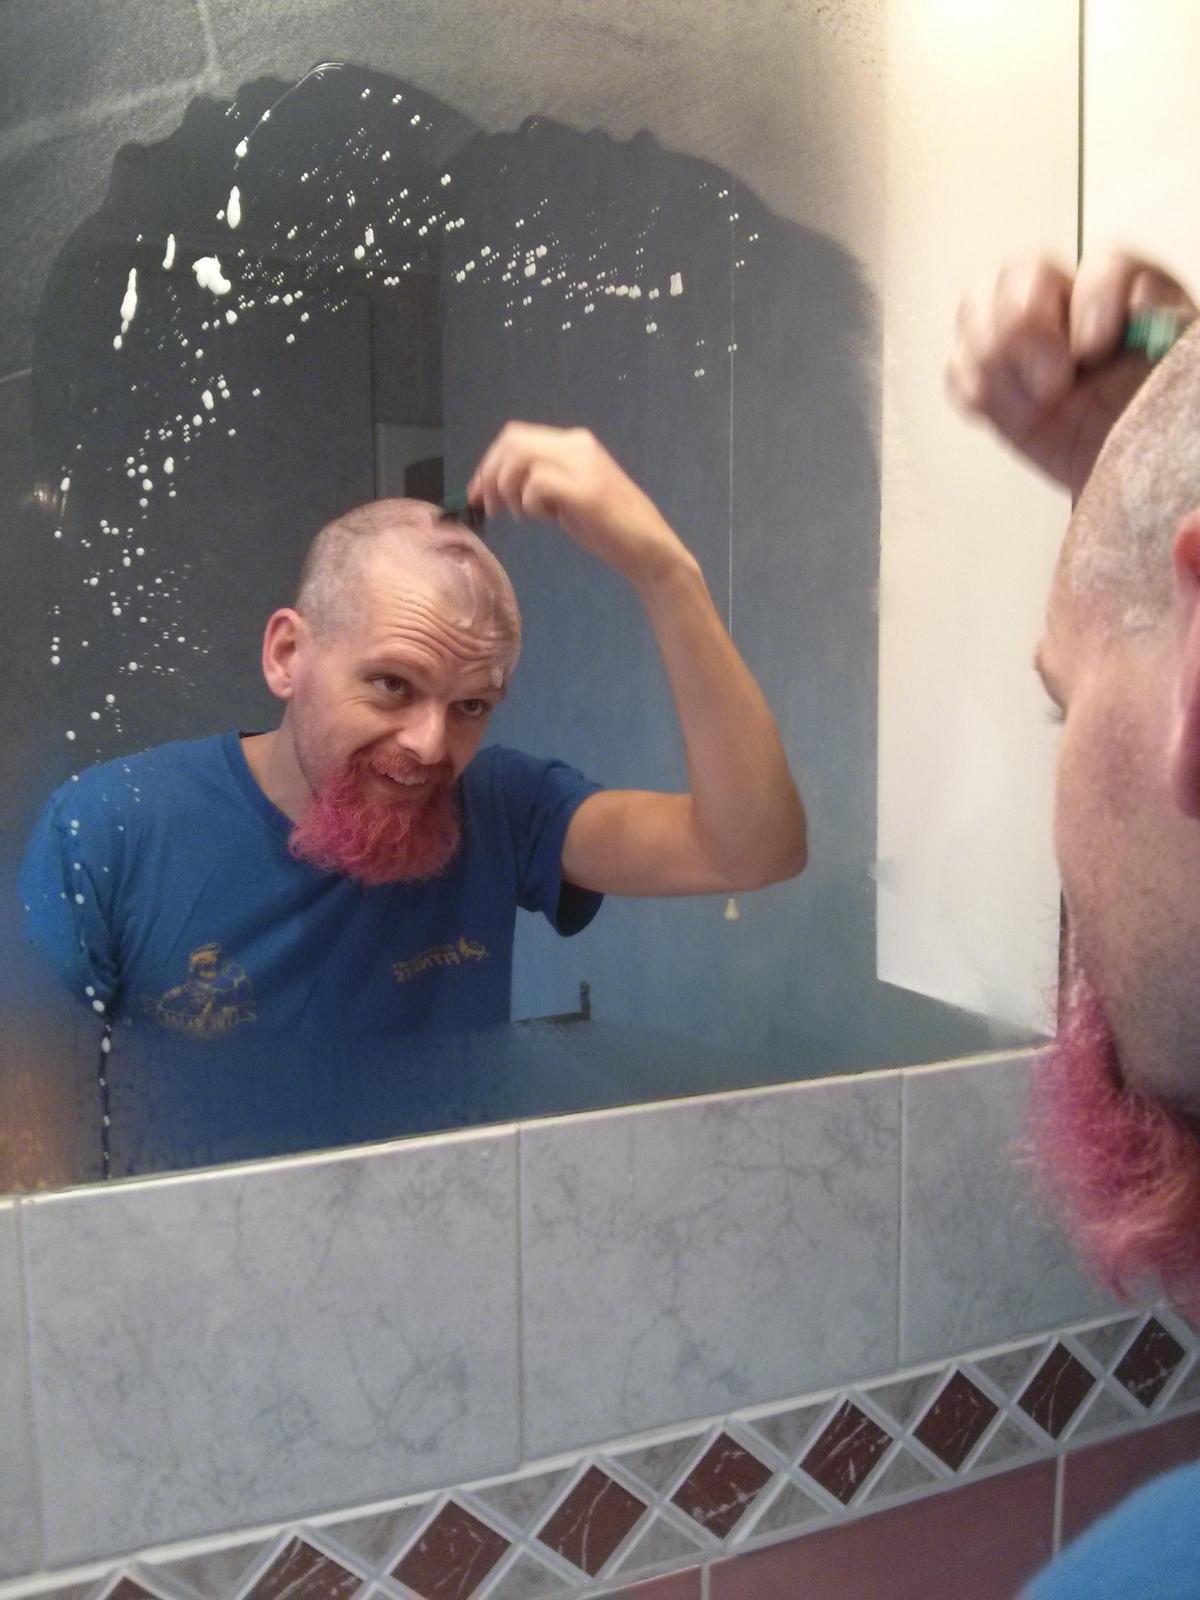 Having grown his all hair, Matt Ketteringham, IT Consultant at Provident Financial, allowed his children to dye it all pink (including eyebrows!) for Comic Relief and has embarked on gradual shaving sessions to culminate in no hair at all today